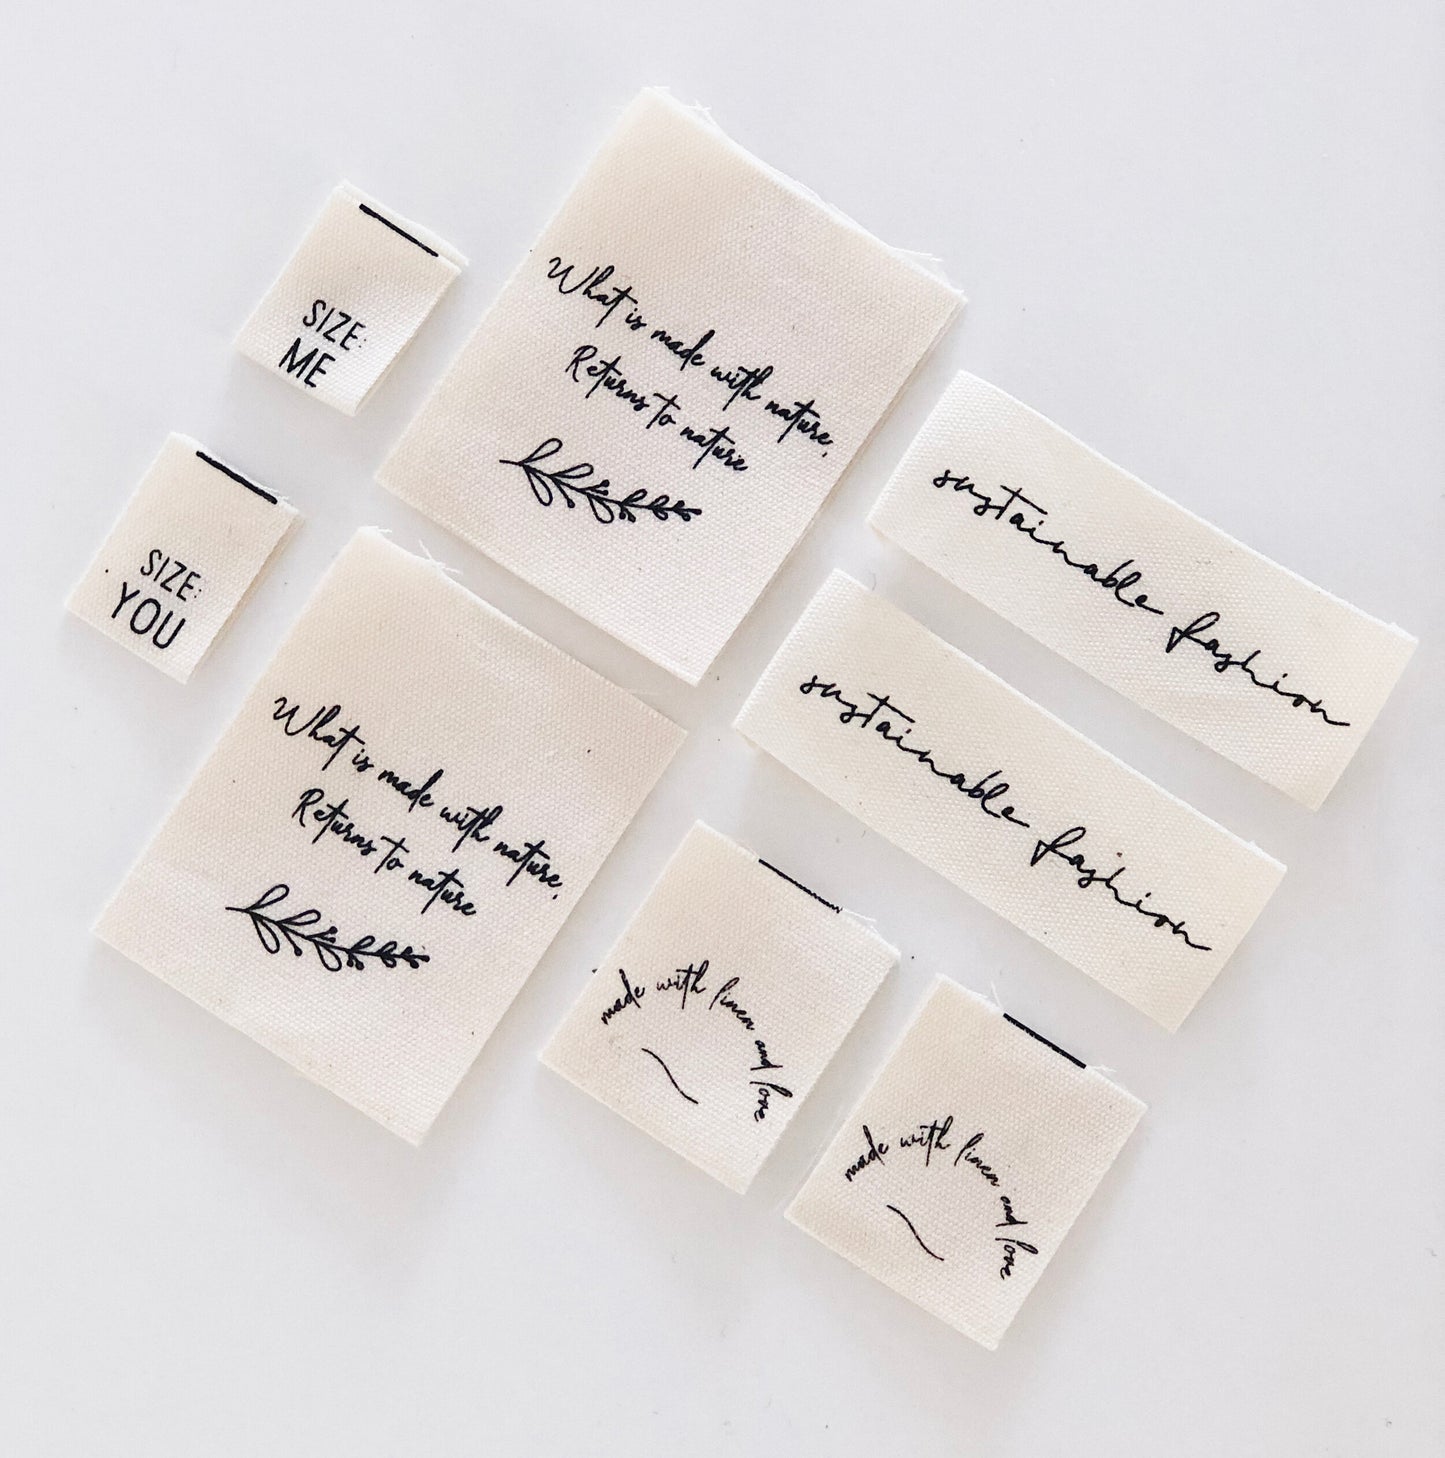 Common Stitch Collection Labels 8 Pack